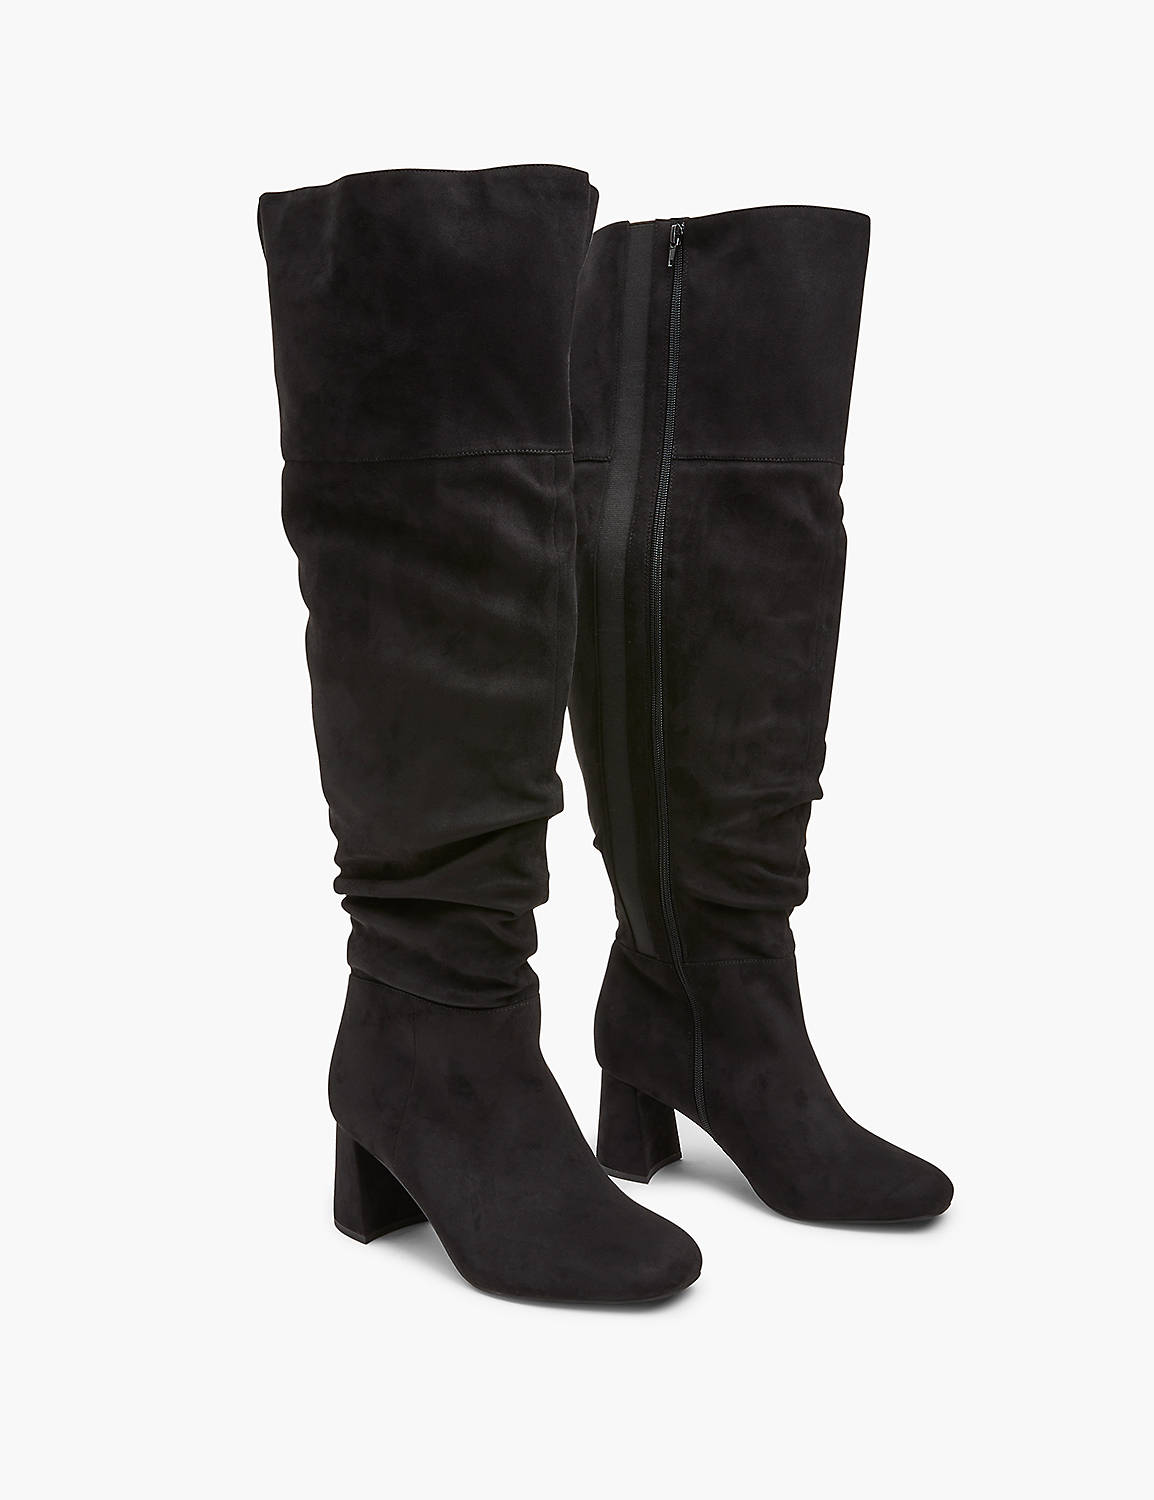 SLOUCH OVER THE KNEE BOOT Product Image 1